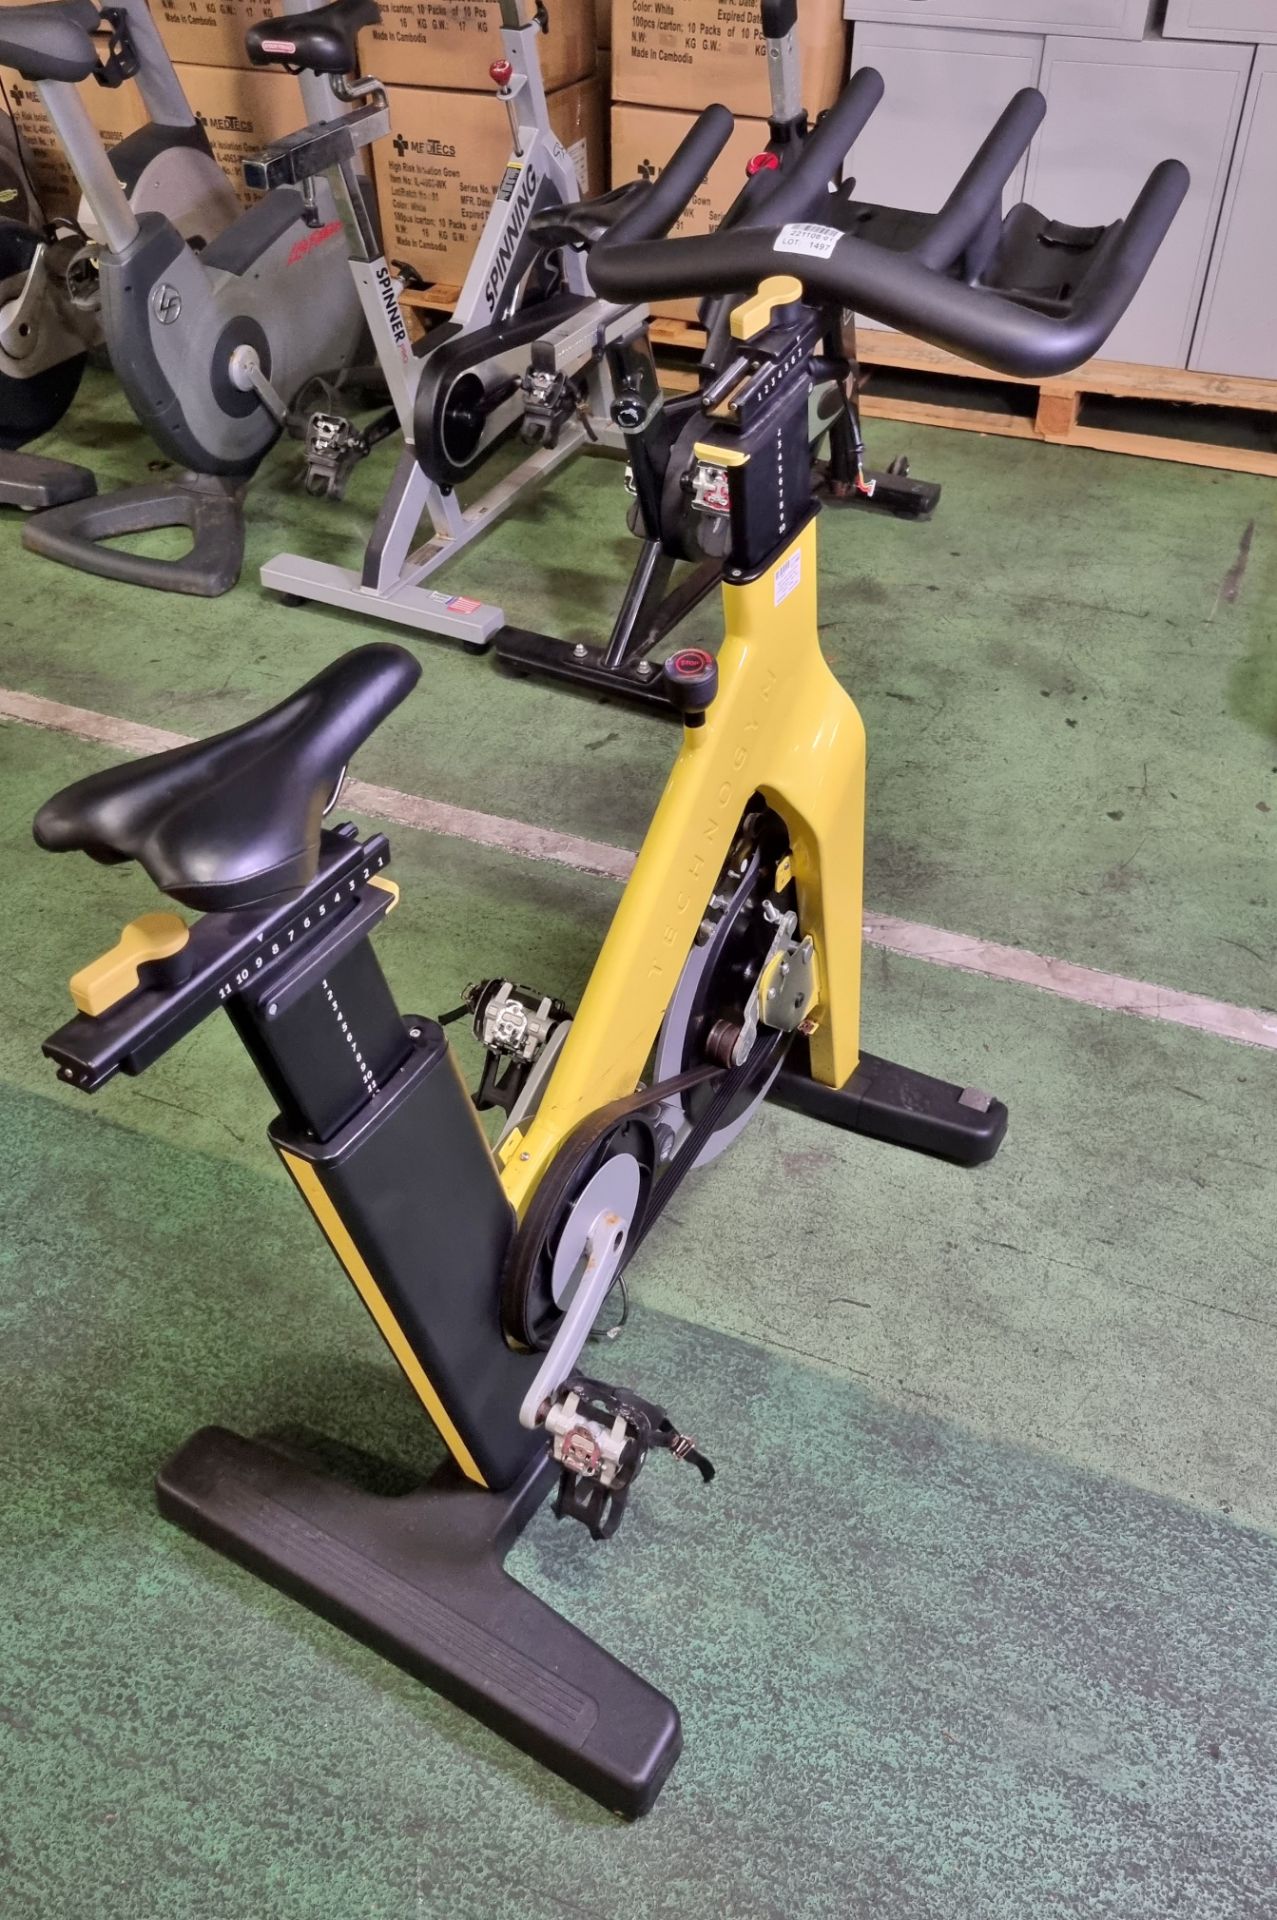 Techno Gym Group Cycle Connect exercise bike (frame only, no console) - 117x60x105cm - Image 3 of 4